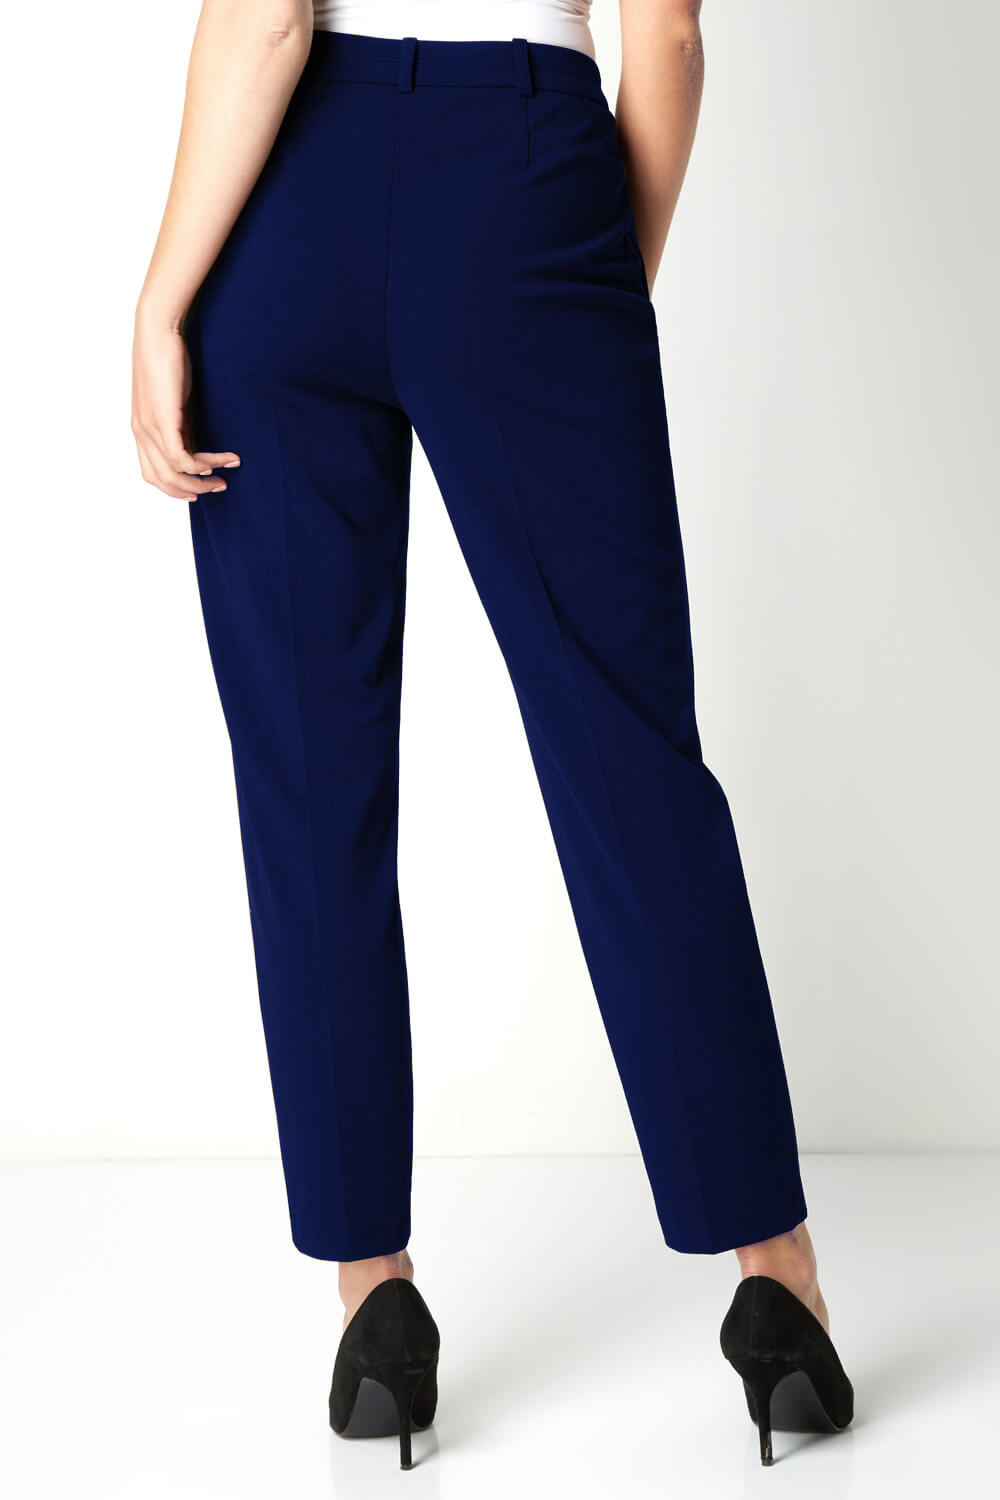 Navy  Long Straight Leg Stretch Trouser, Image 2 of 3